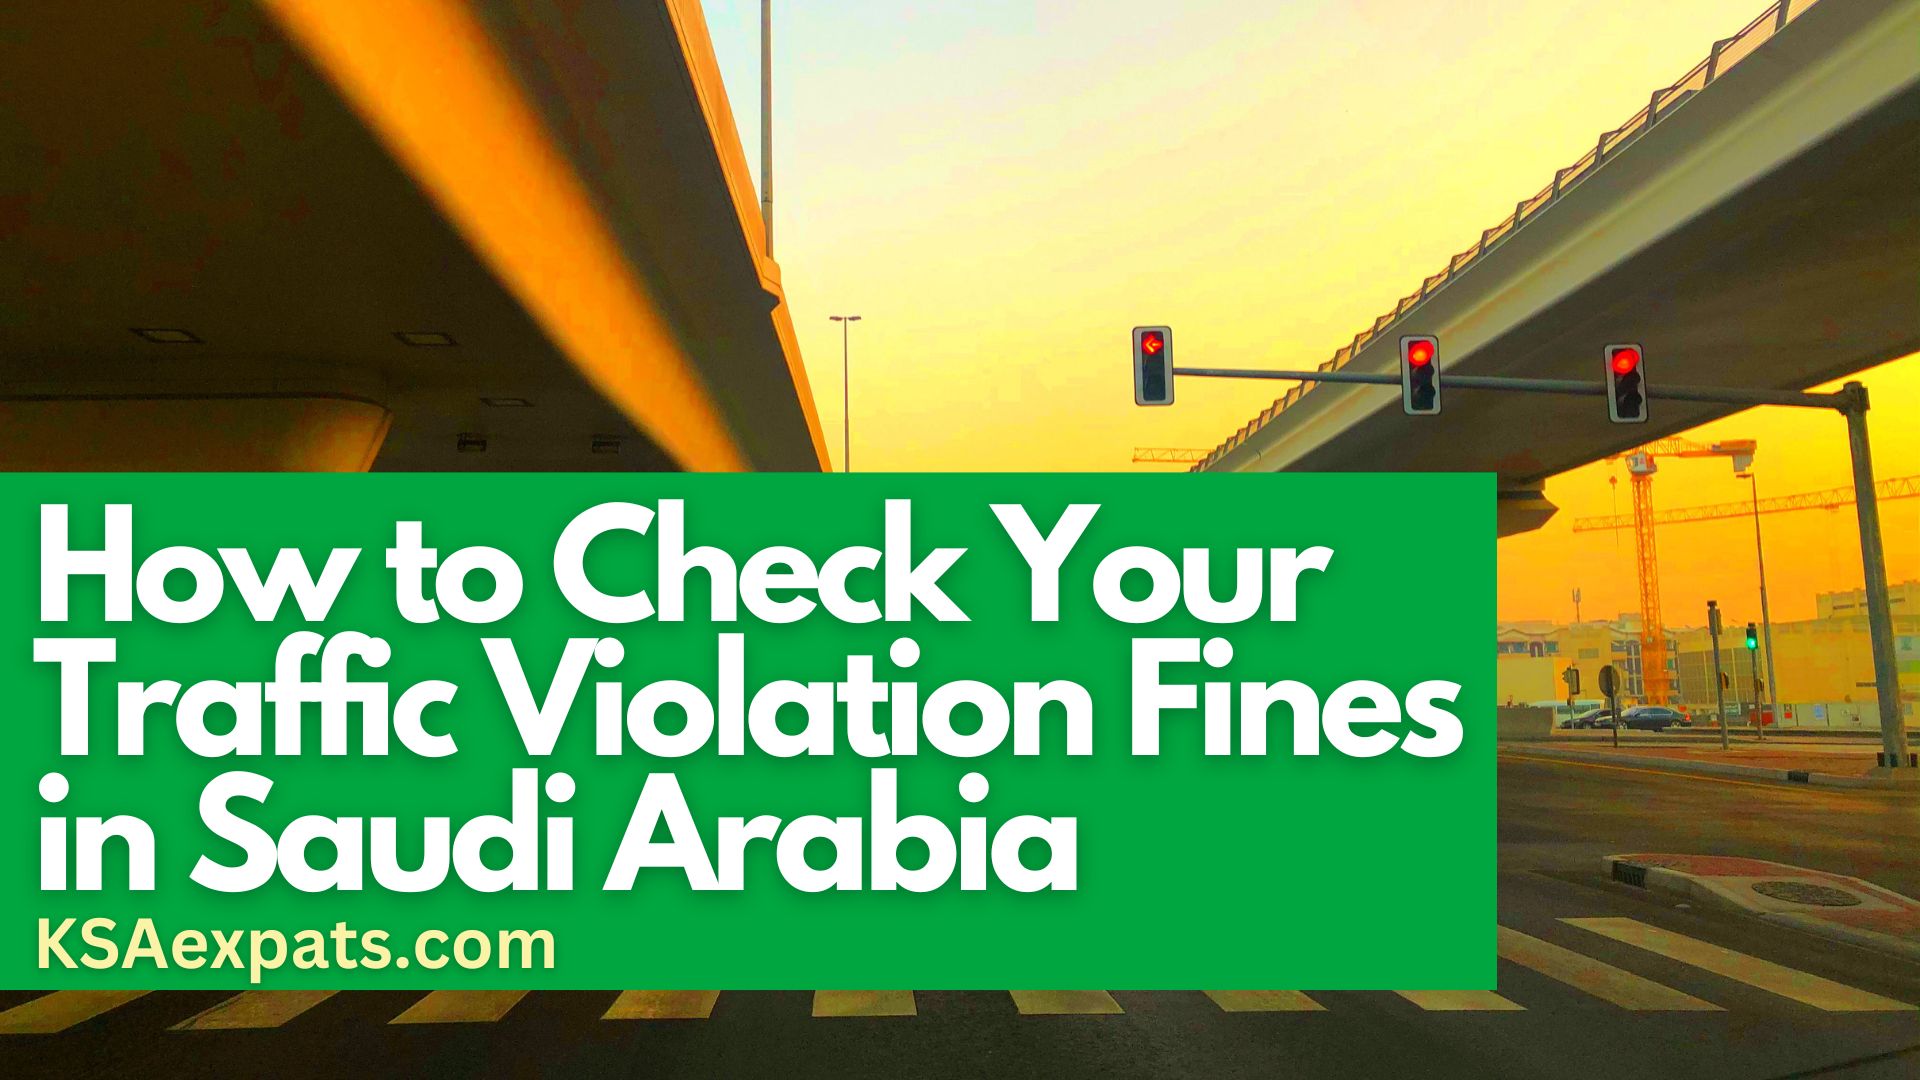 How to Check Your Traffic Violation Fines in Saudi Arabia